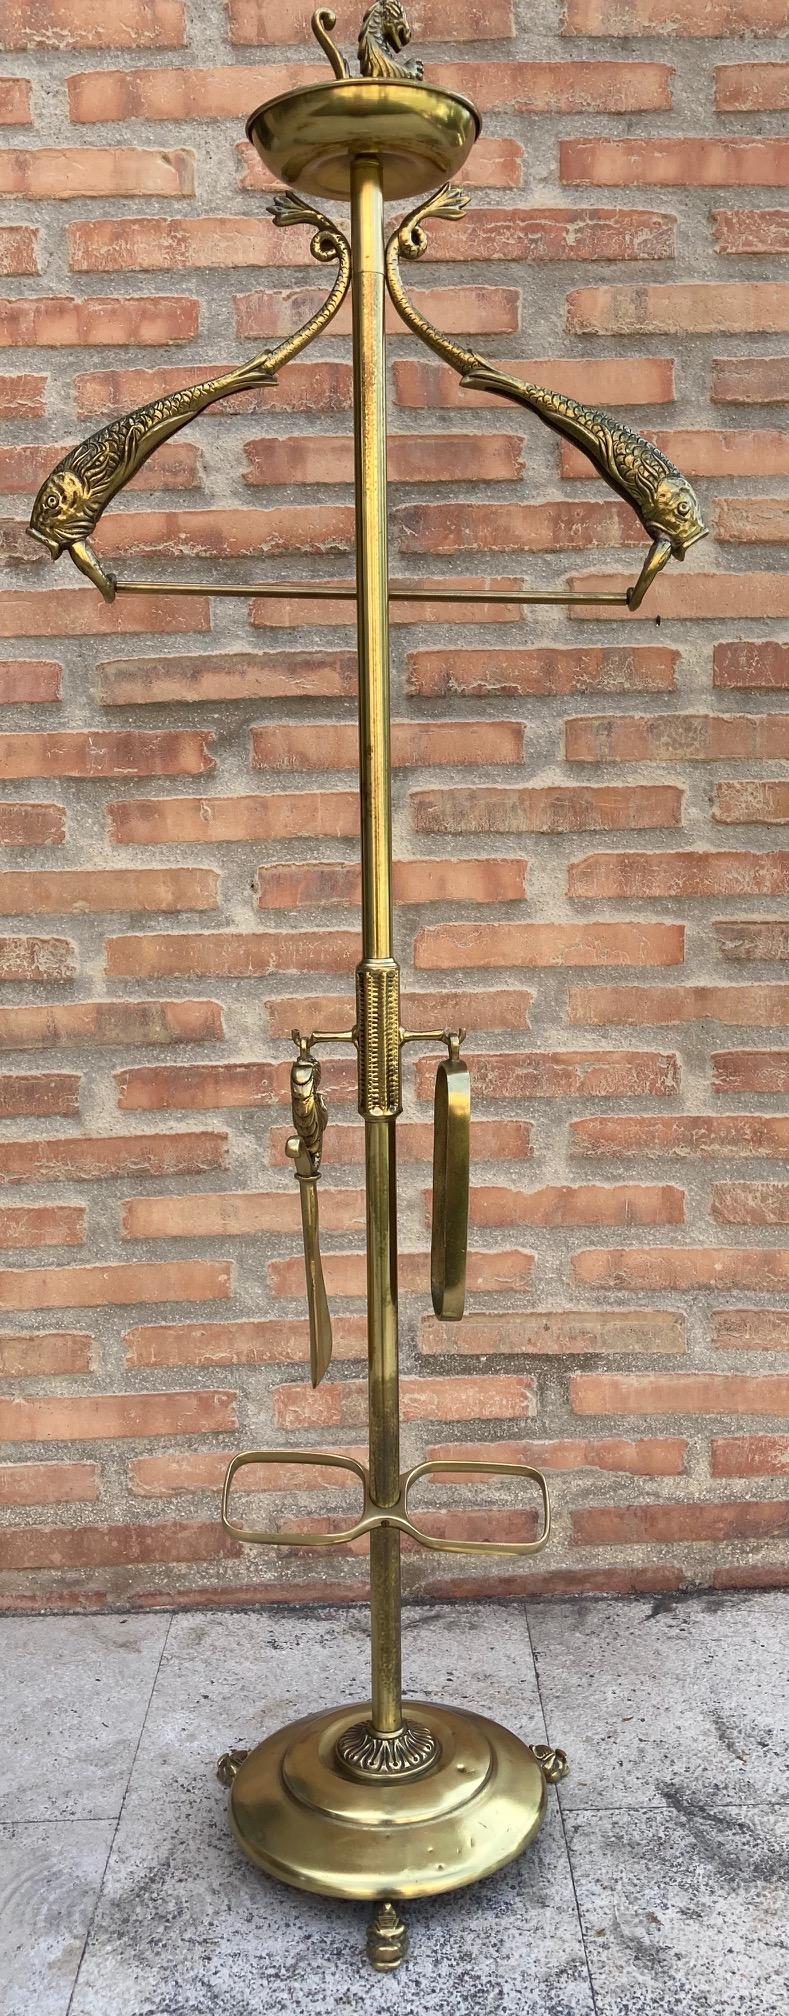 Bronze and brass valet stand dressboy, 1940s
A gentleman's valet with many interesting details.
The valet is in a very good original condition with a beautiful brass patina due to age and use.